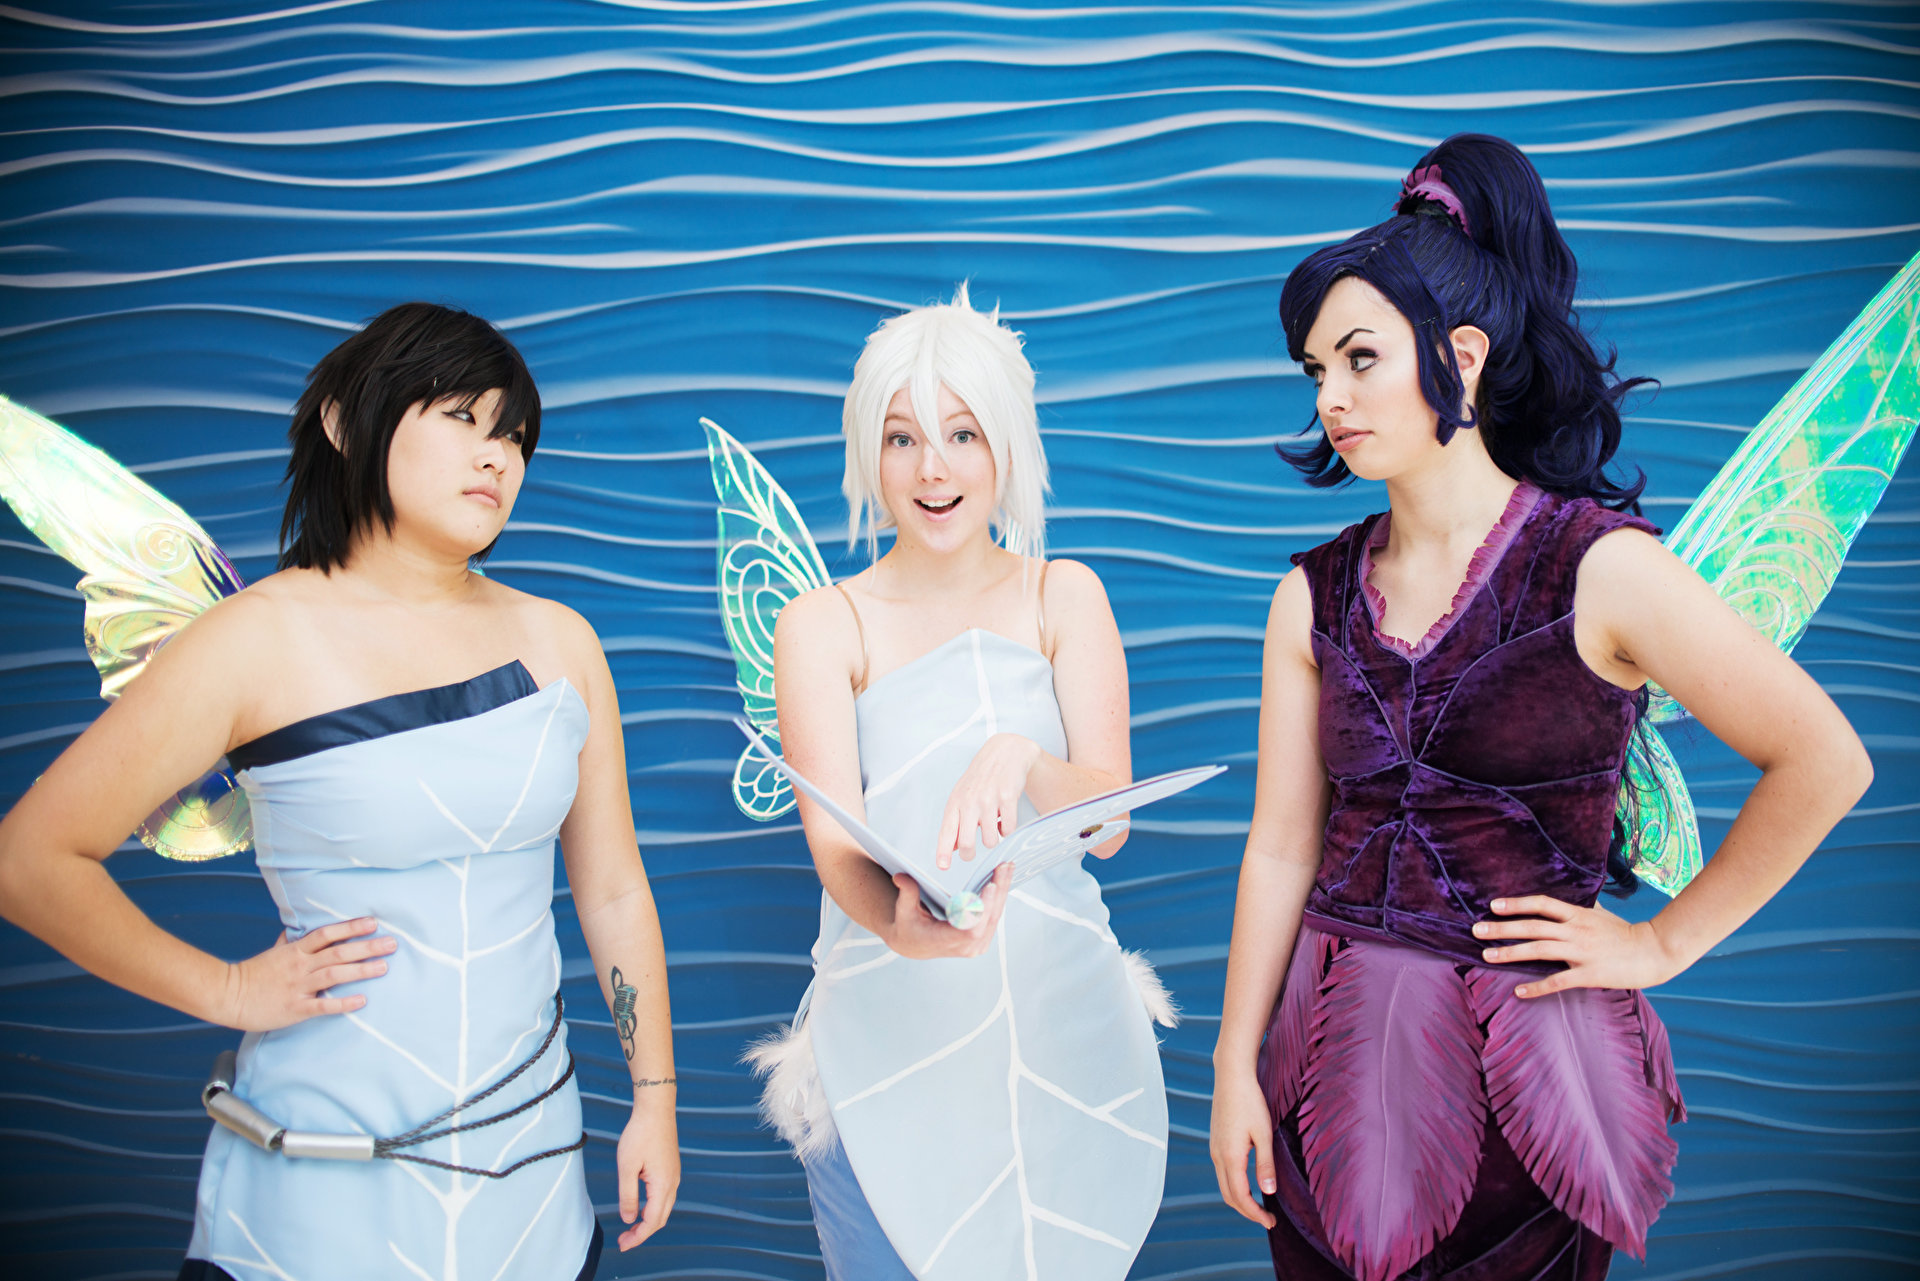 Cospix.net photo featuring Royal Lily and Hyuni Cos